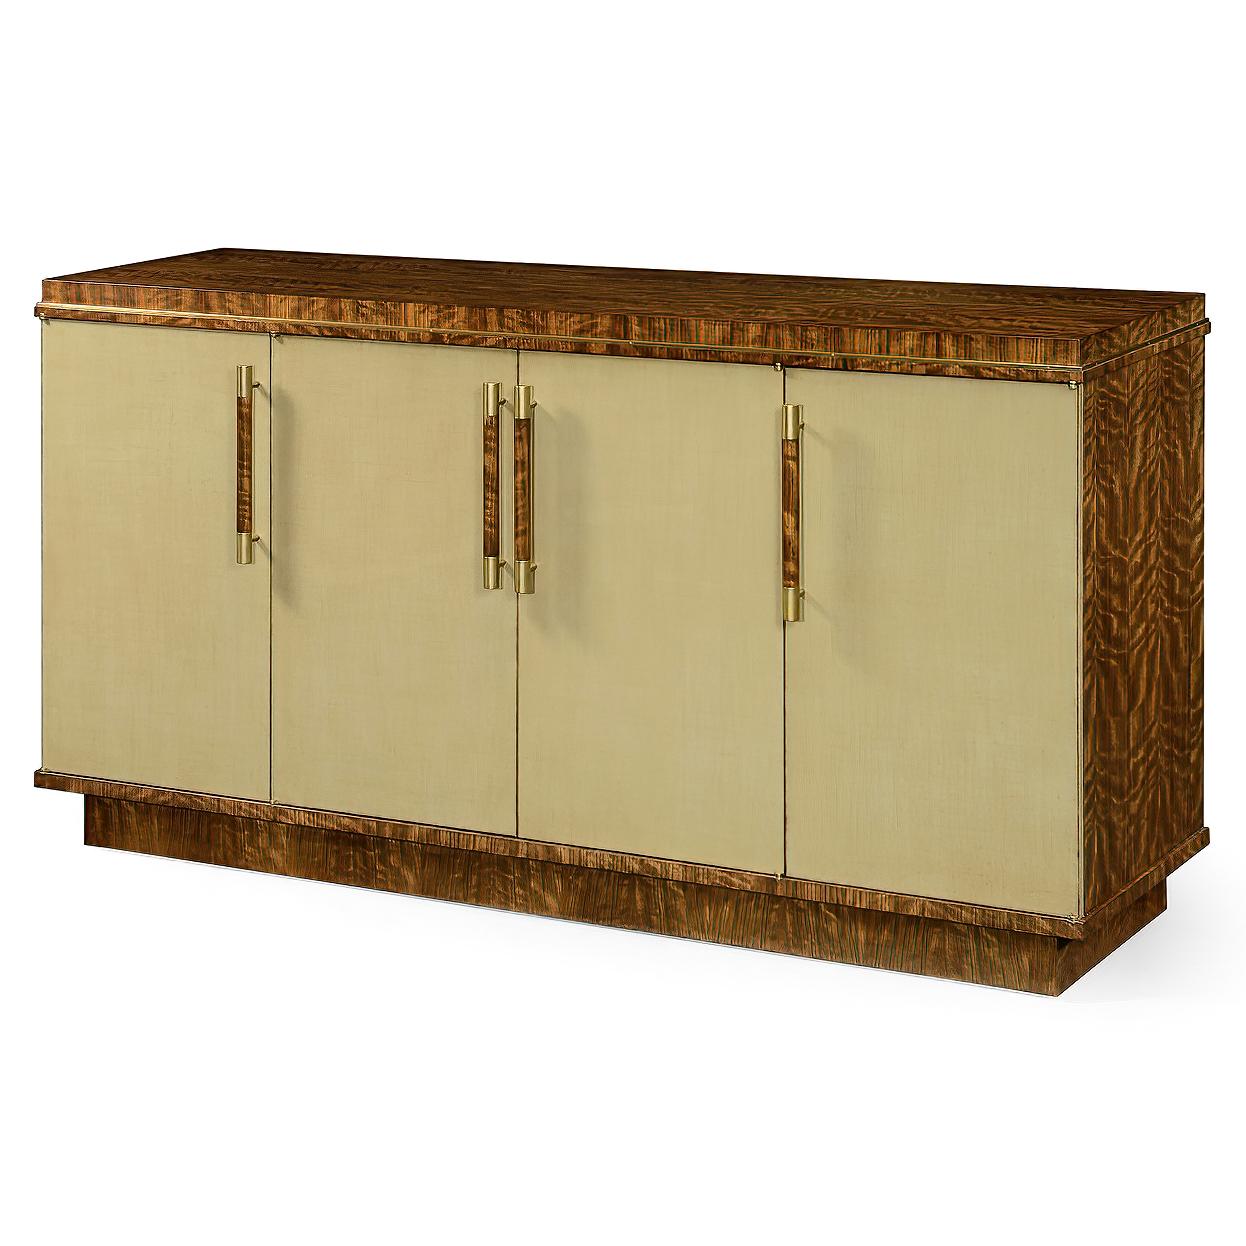 Mid-Century Modern style decorative veneered sideboard with brass details and four doors, strip handles and an internal fold-out serving slide. Celadon toned panels to the doors, fully veneered within.

Dimensions: 72